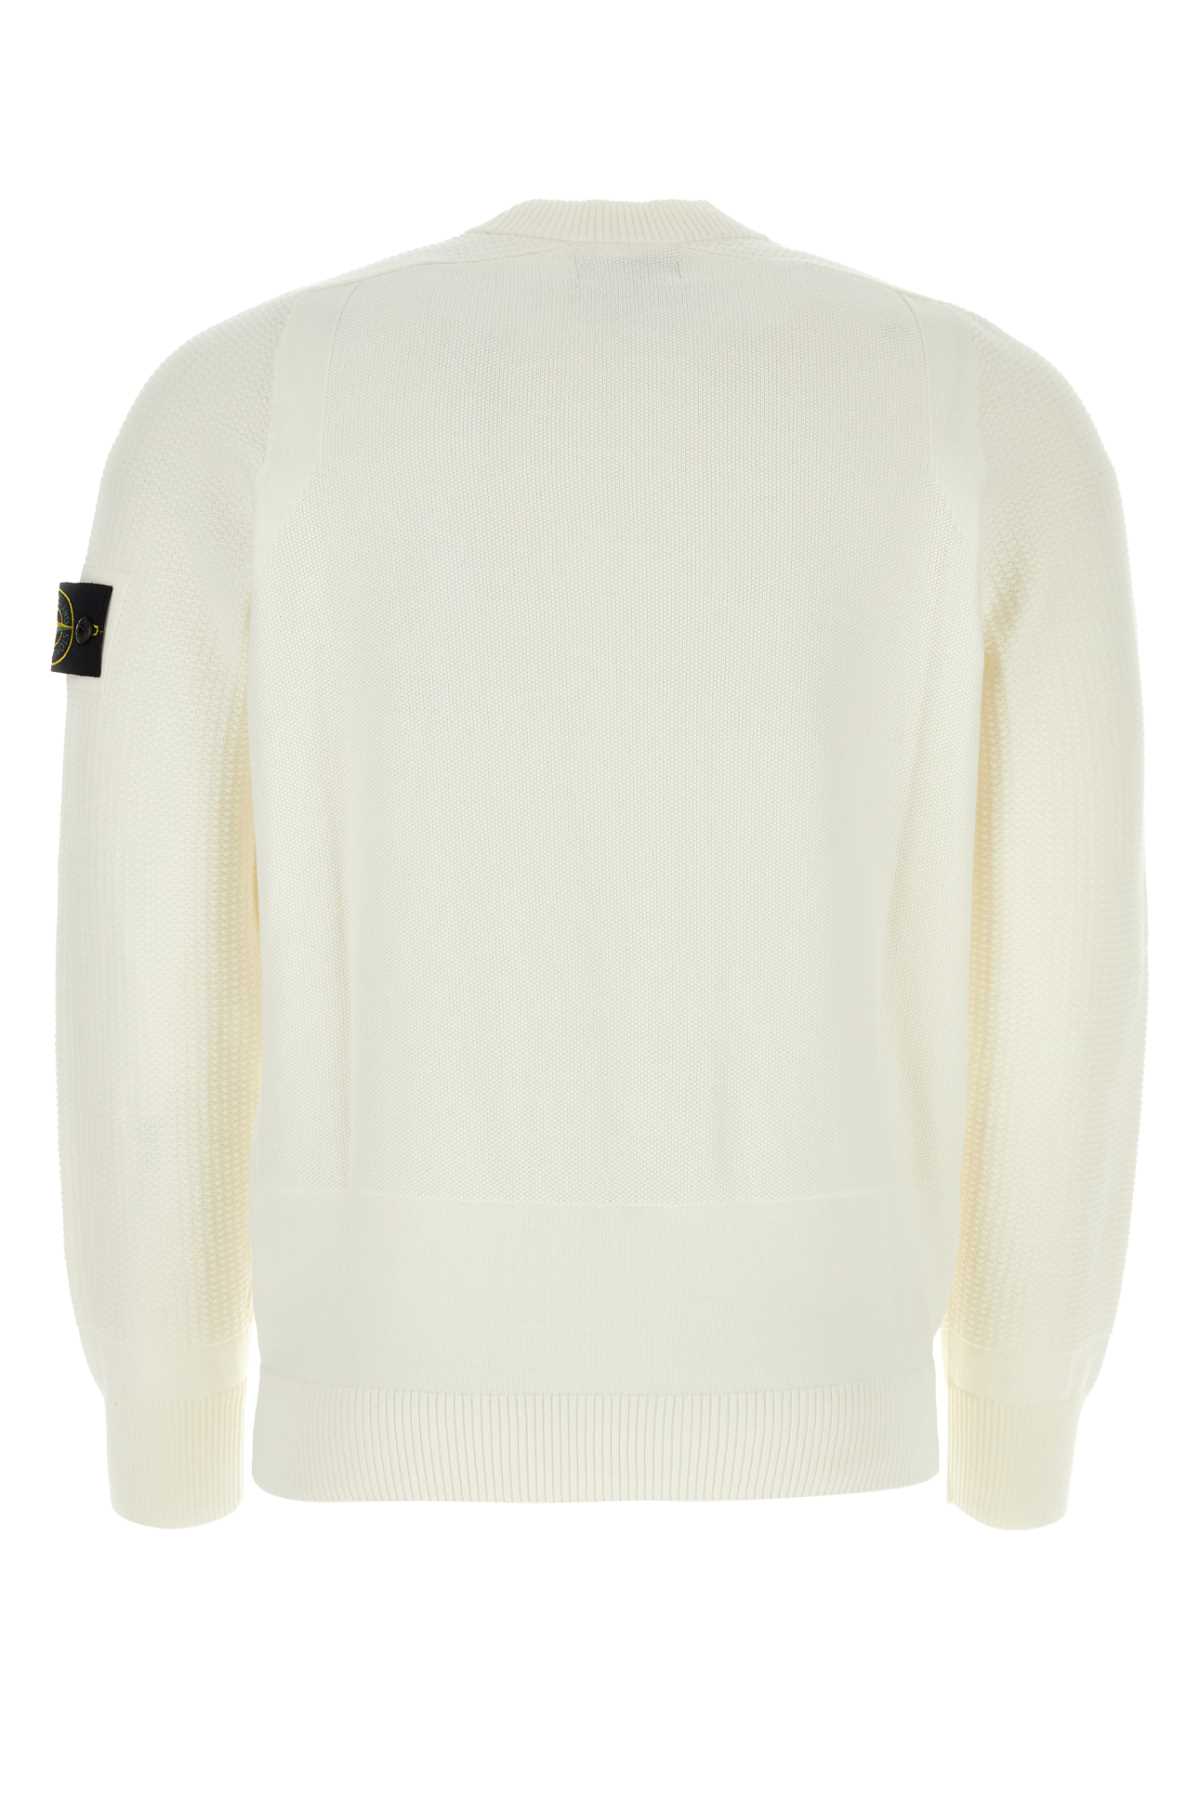 Stone Island Ivory Cotton Sweater In Wht